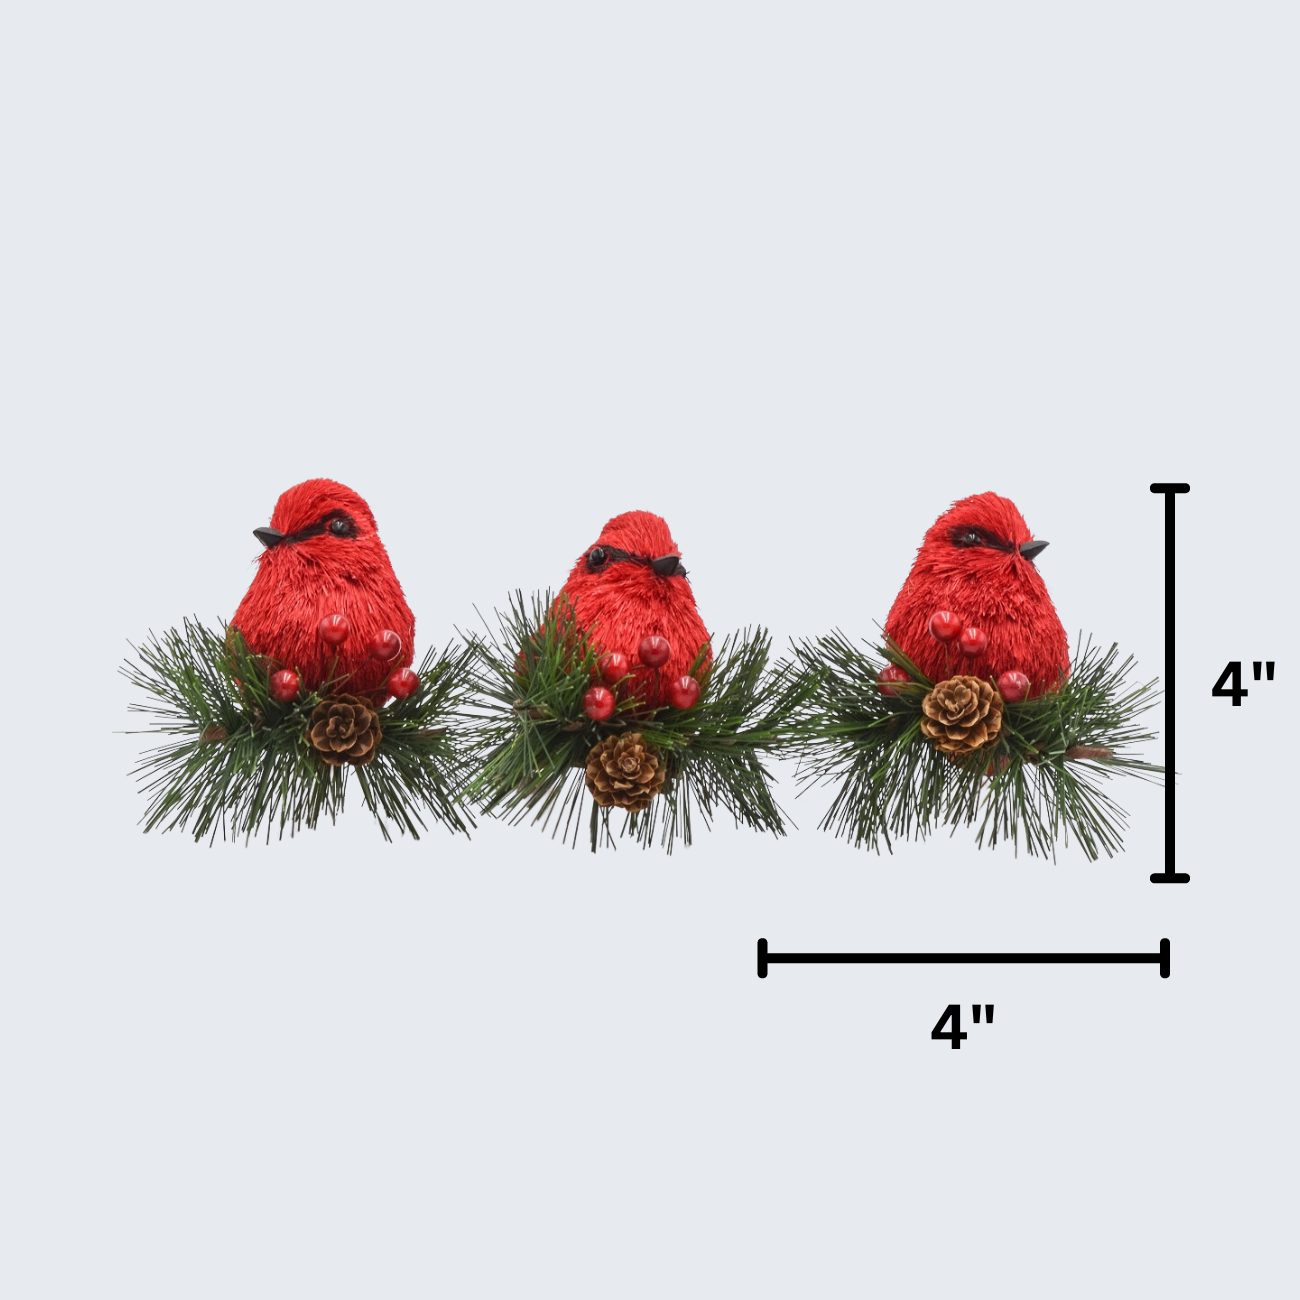 4" Cardinal ornaments on clips set of 3